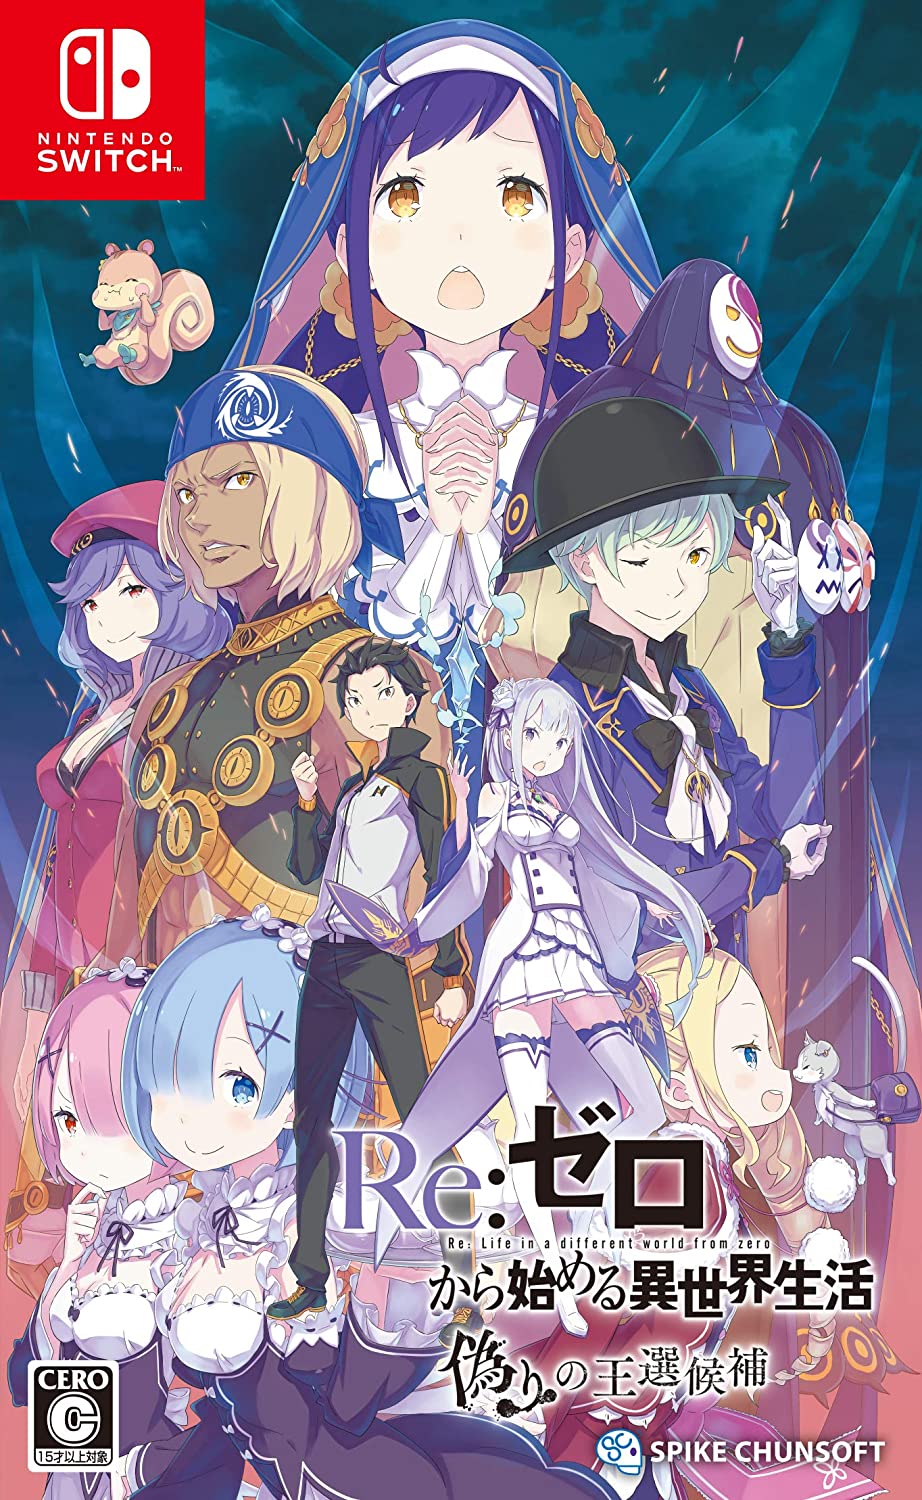 Re:Zero − Starting Life in Another World: The Prophecy of the